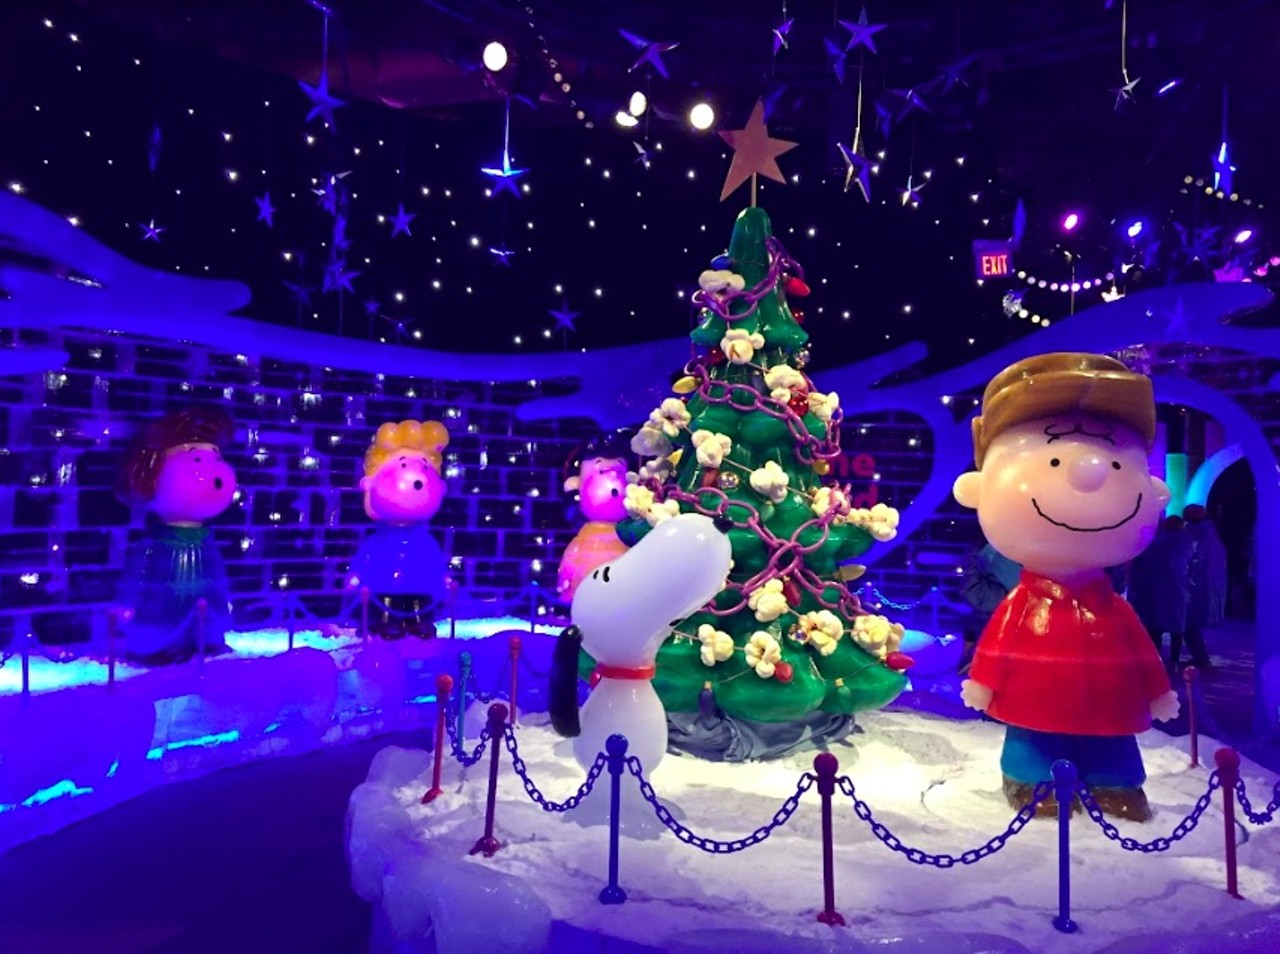 ICE: "A Charlie Brown Christmas" 
6000 W. Osceola Parkway, Kissimmee
Dates open: Nov. 17 - Jan. 3
Cost: Tickets are $23 for kids and $33 for adults
The most popular event at Gaylord Palms is ICE, a 20,000-square-foot walk-through exhibit filled with characters, slides and decor carved from 2 million pounds of ice. Since it's a literal frozen attraction, ICE is kept at a frigid 9 degrees. Thick socks, gloves, hats and Gaylord Palms-provided blue parkas are highly recommended. This year’s theme is “A Charlie Brown Christmas,” in which classic Peanuts characters and scenes come to life.